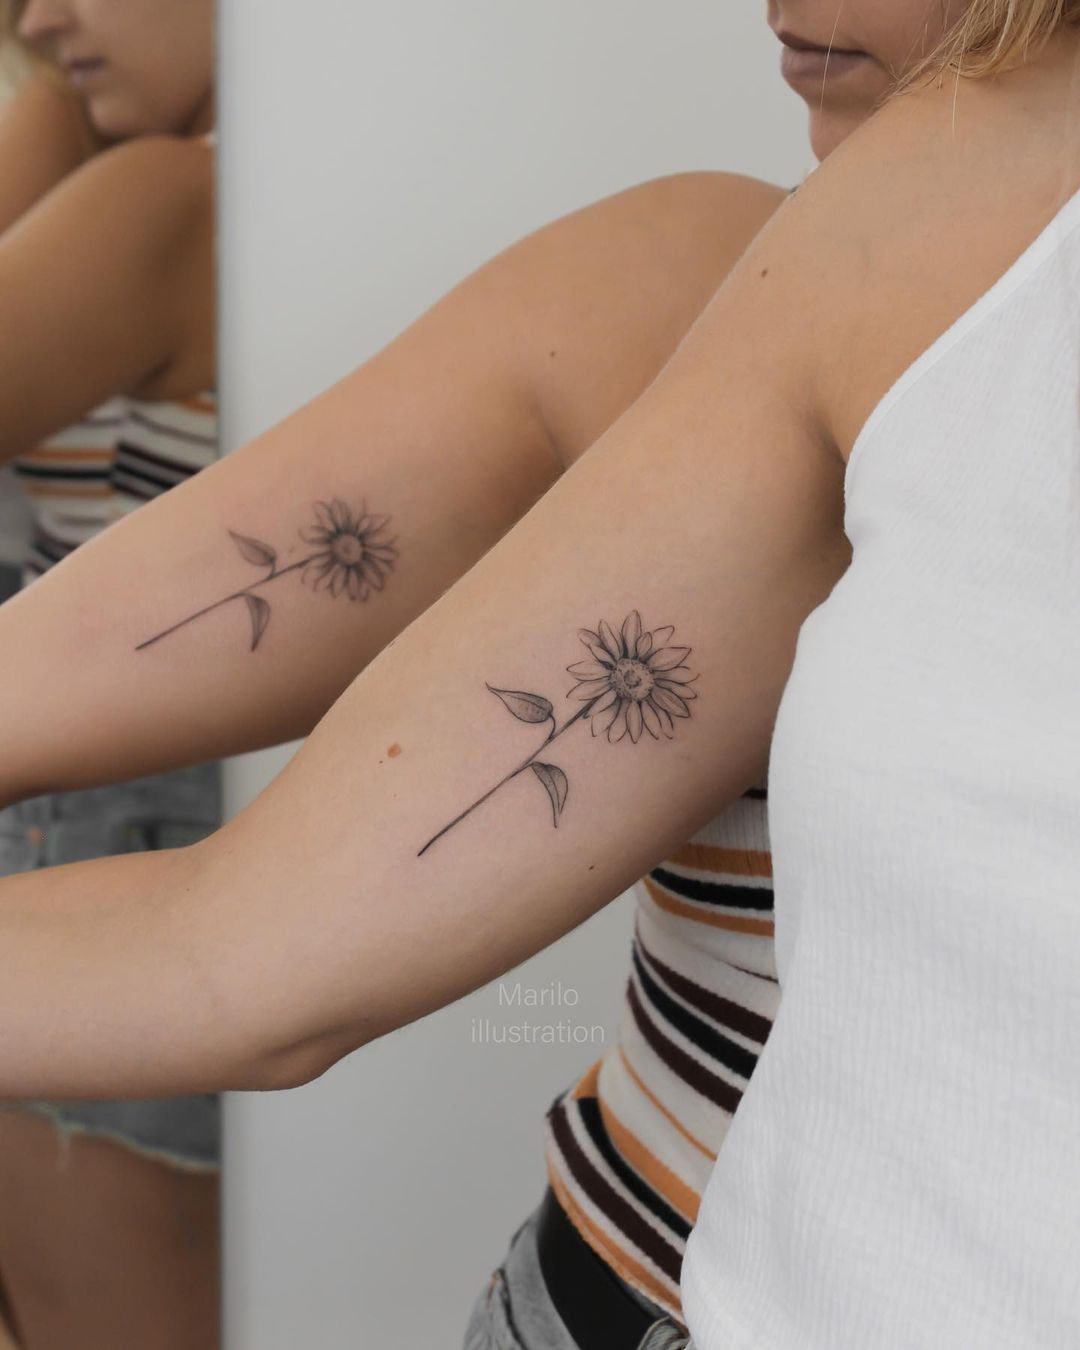 31 Best Matching Tattoos Images In 2020  Beautyholo  Sunflower tattoos Matching  tattoos Tattoos